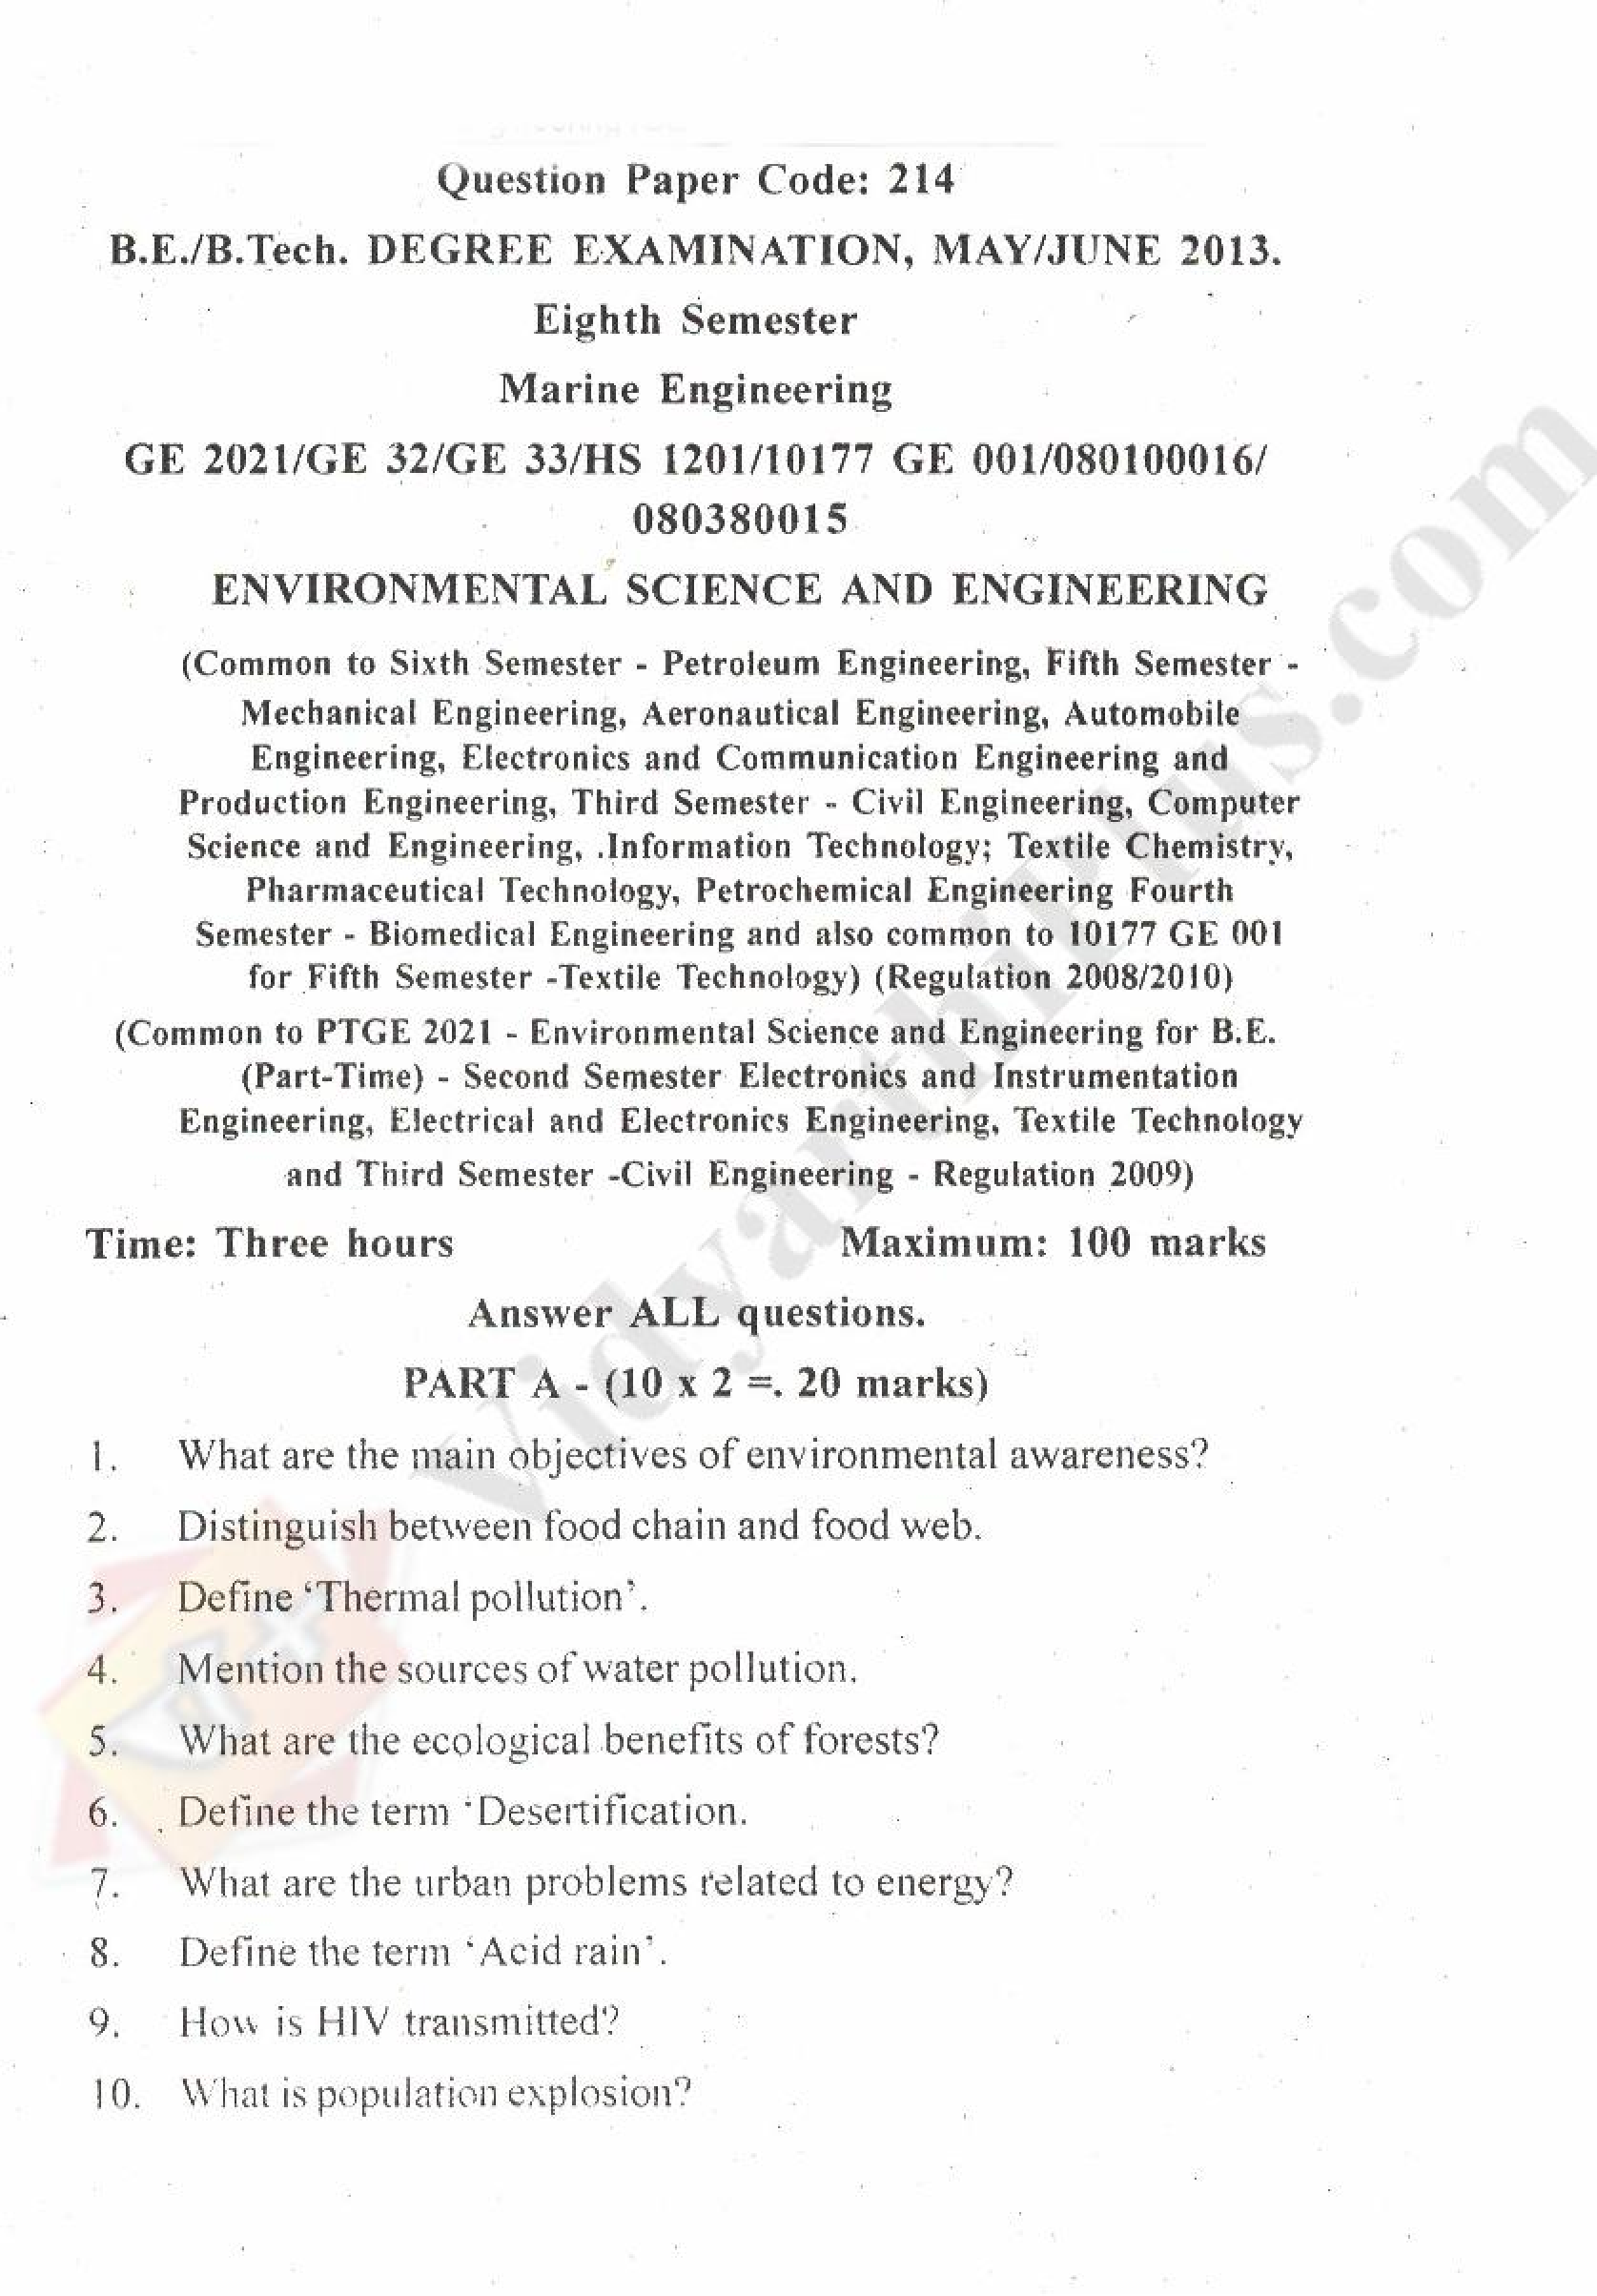 Environmental Science And Engineering Solved Question Papers - 2015 Edition